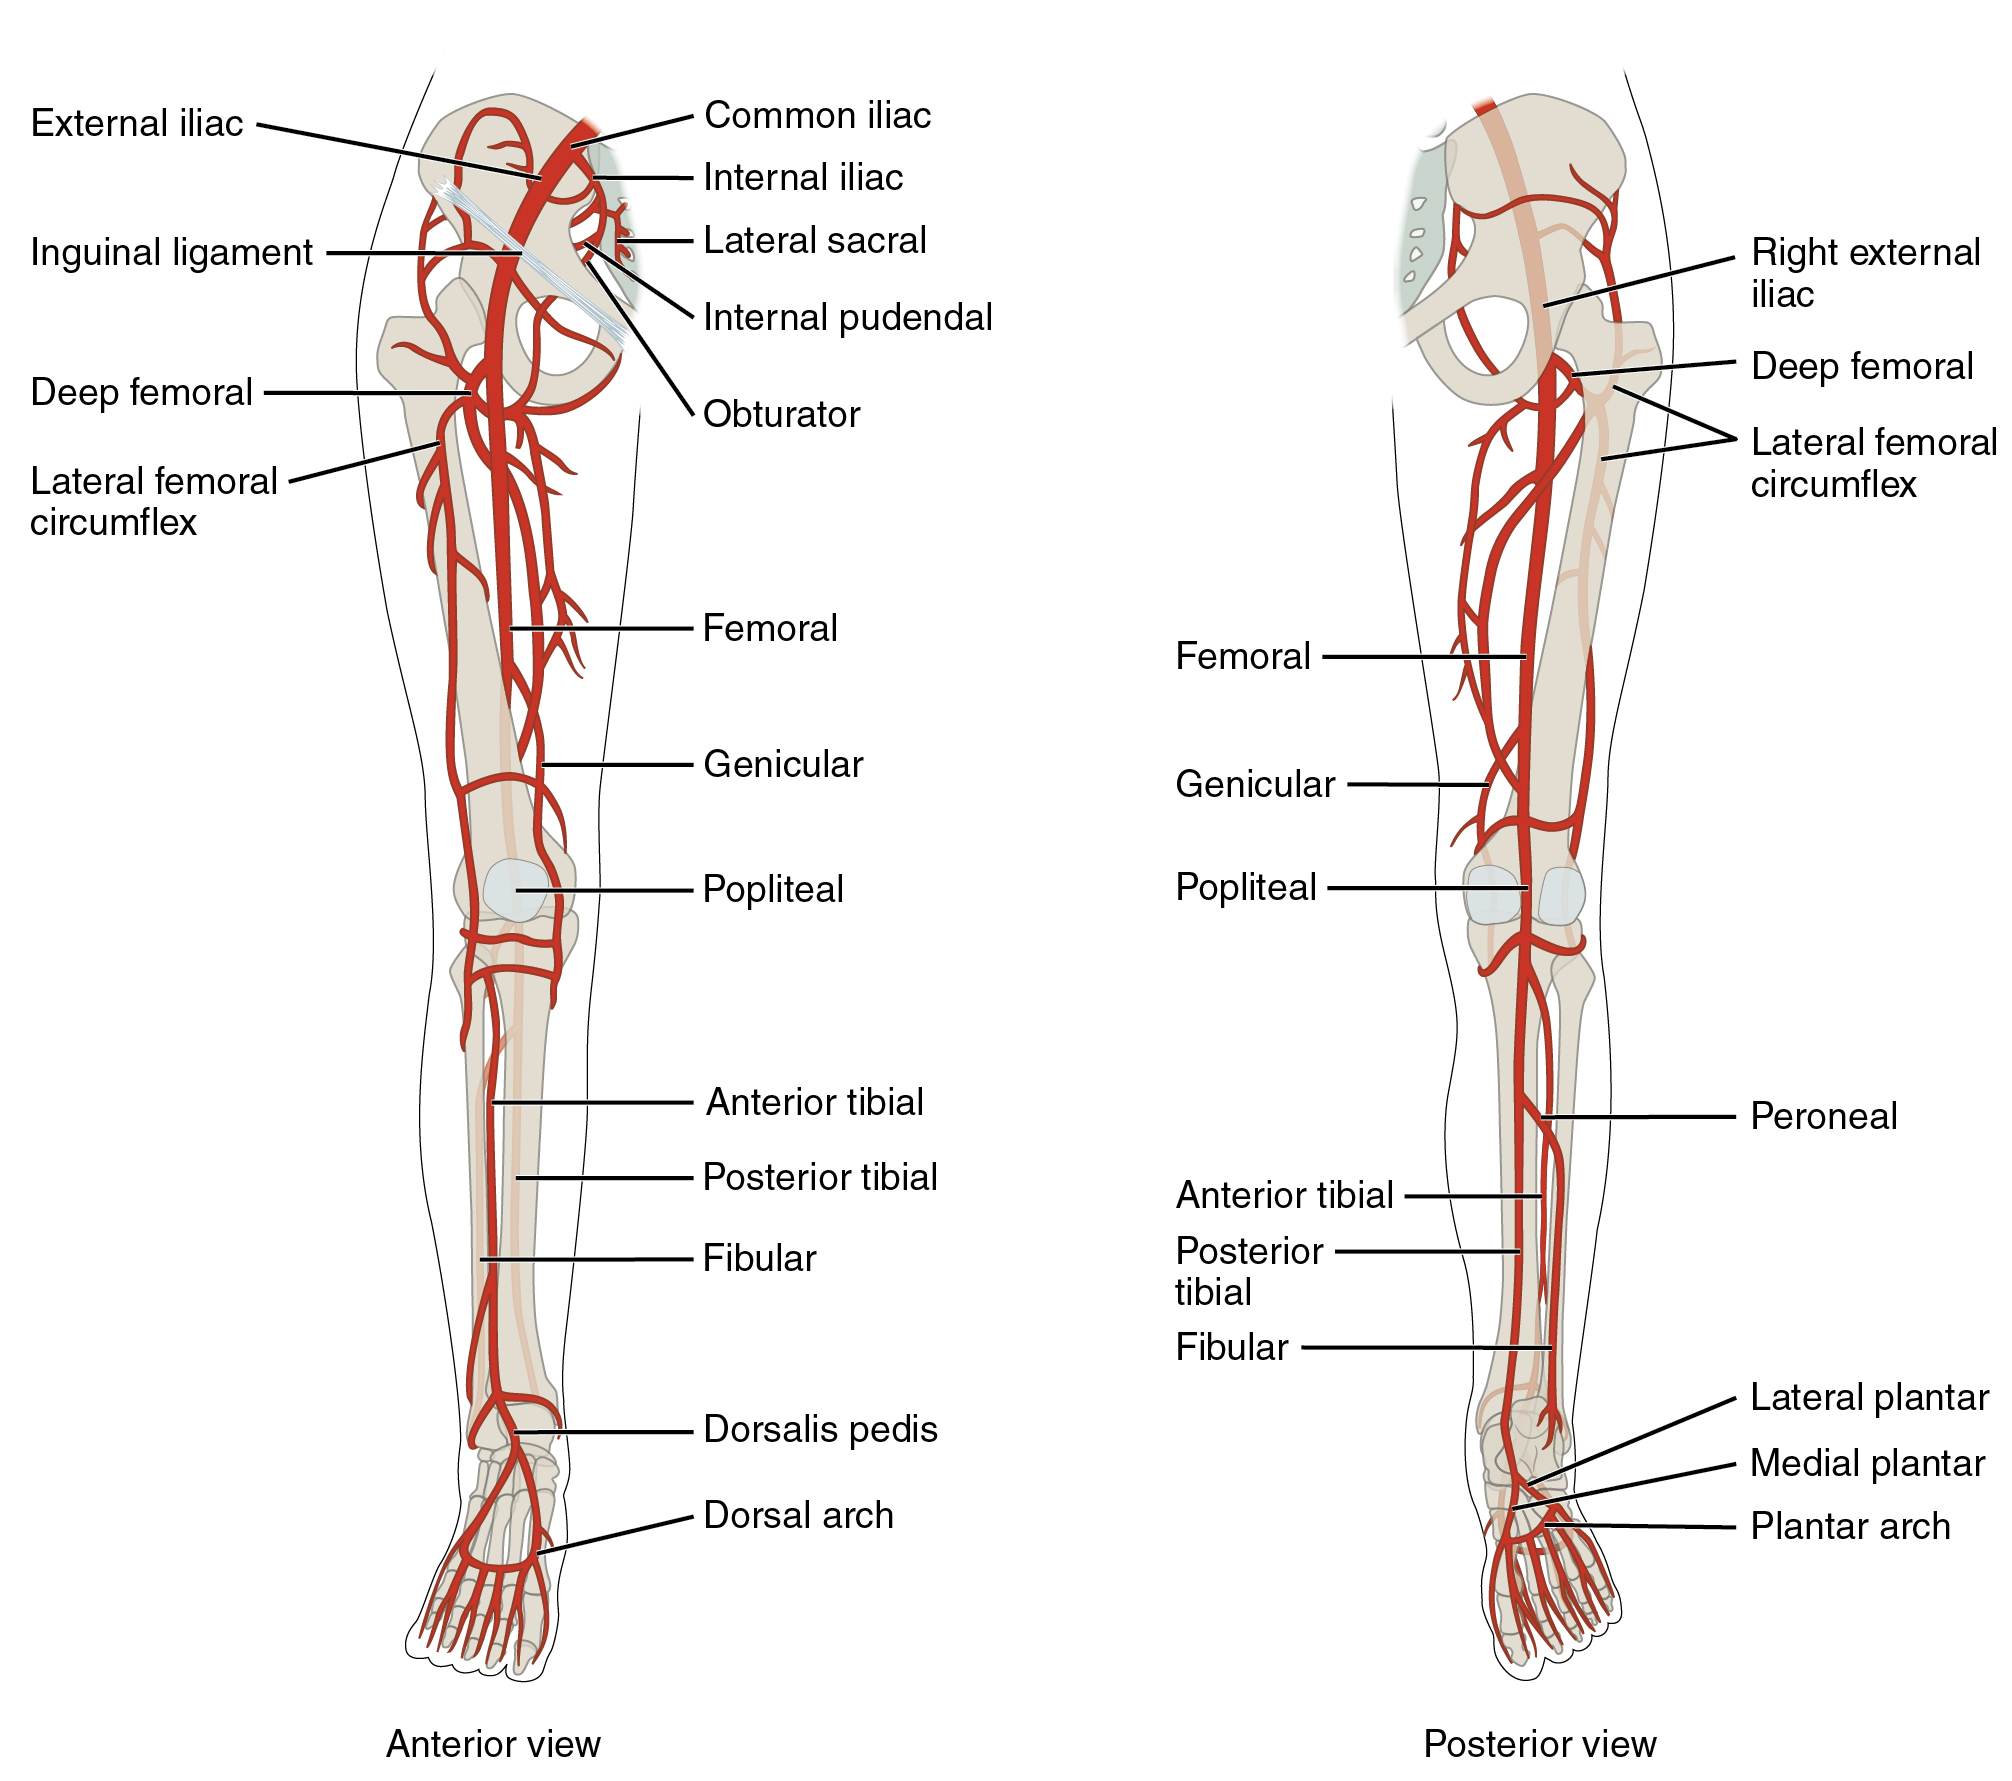 Deep Veins of the Leg - Schematic • The Blood Project